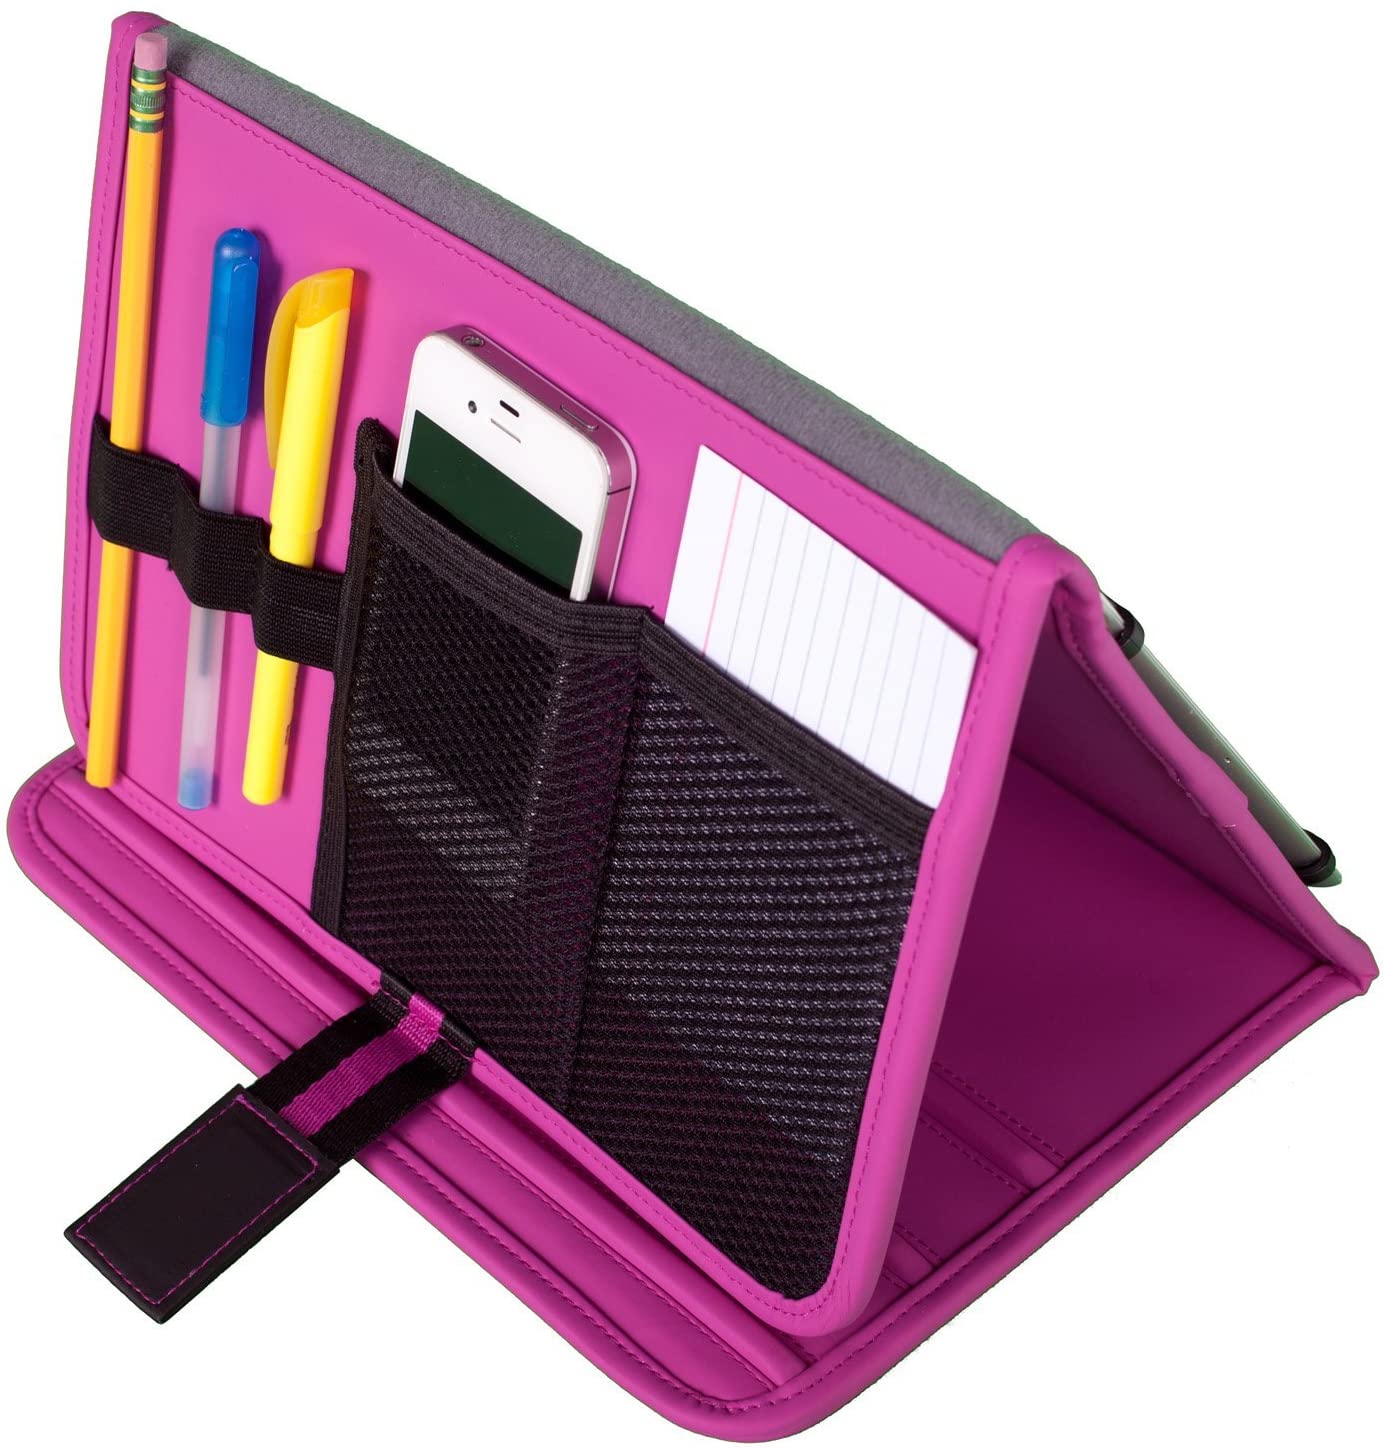 Five Star Trifold Tablet Case with Stand, Choose Color (36010)